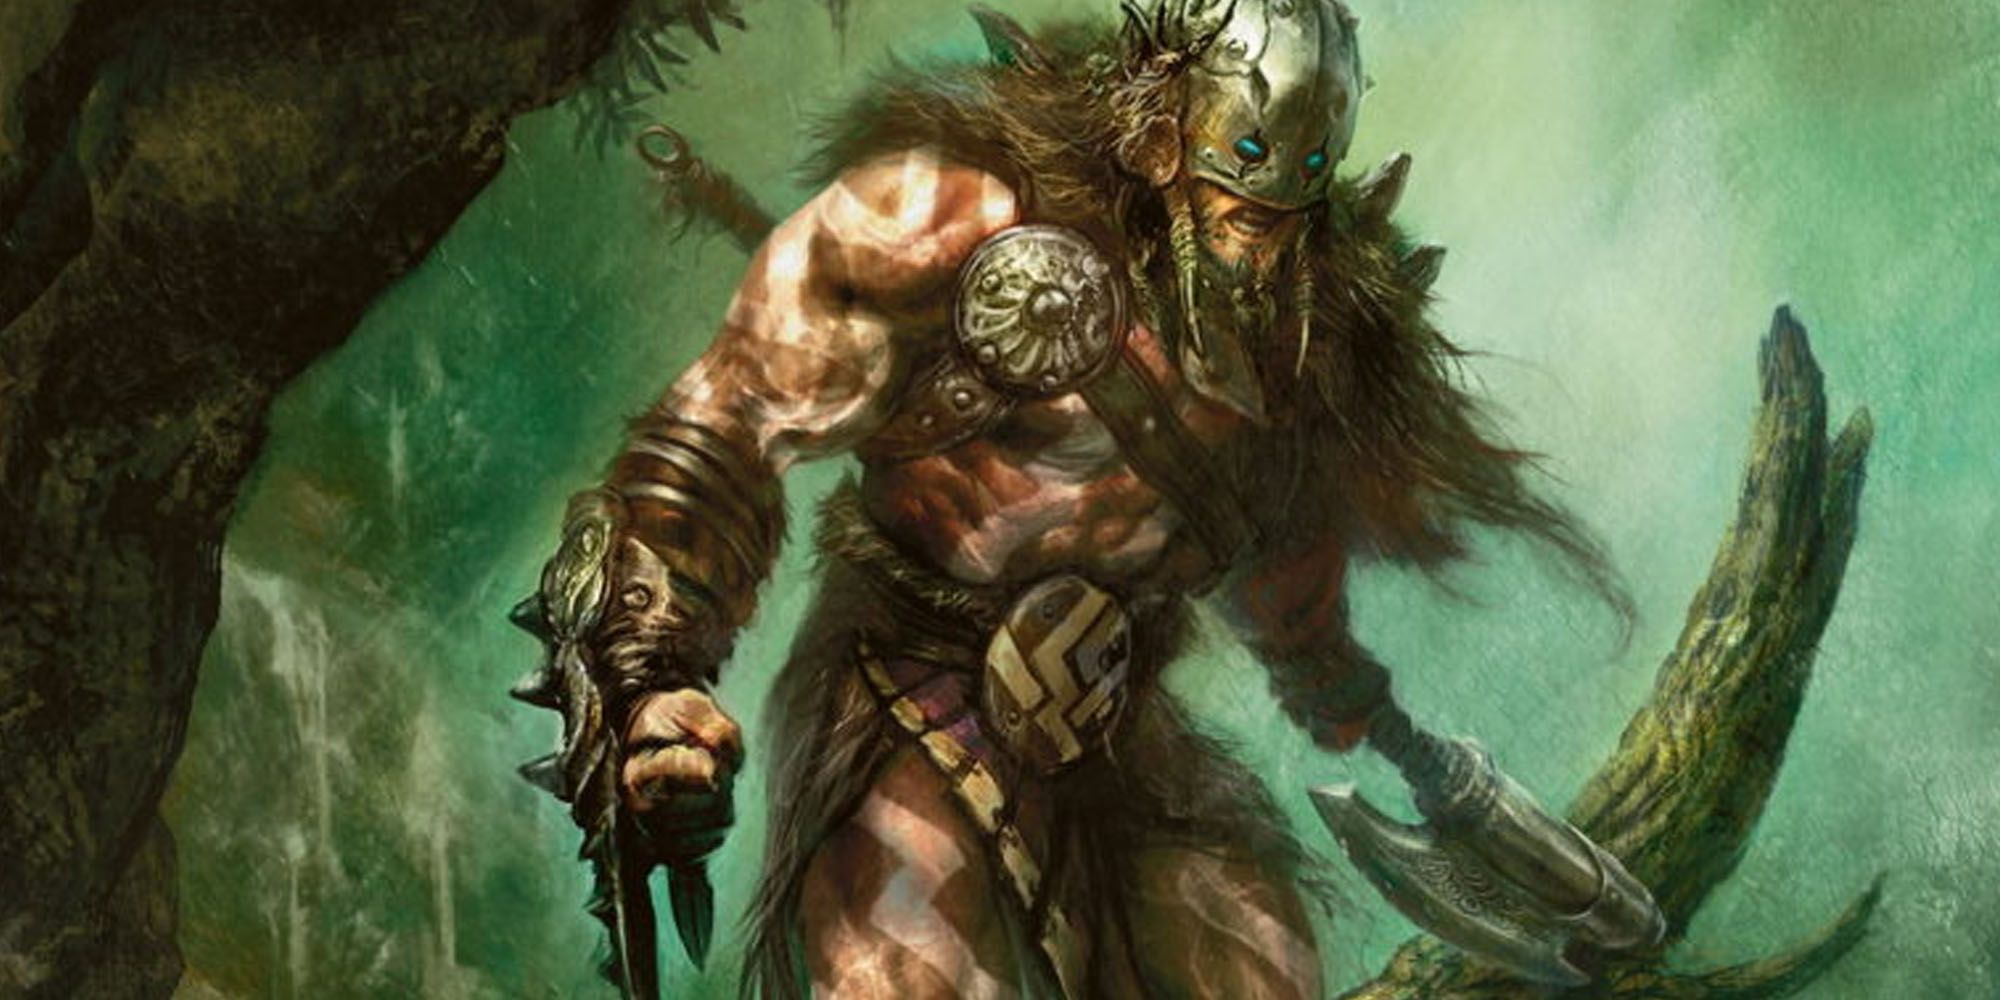 A Barbarian stalking through the forest with a greataxe in DnD